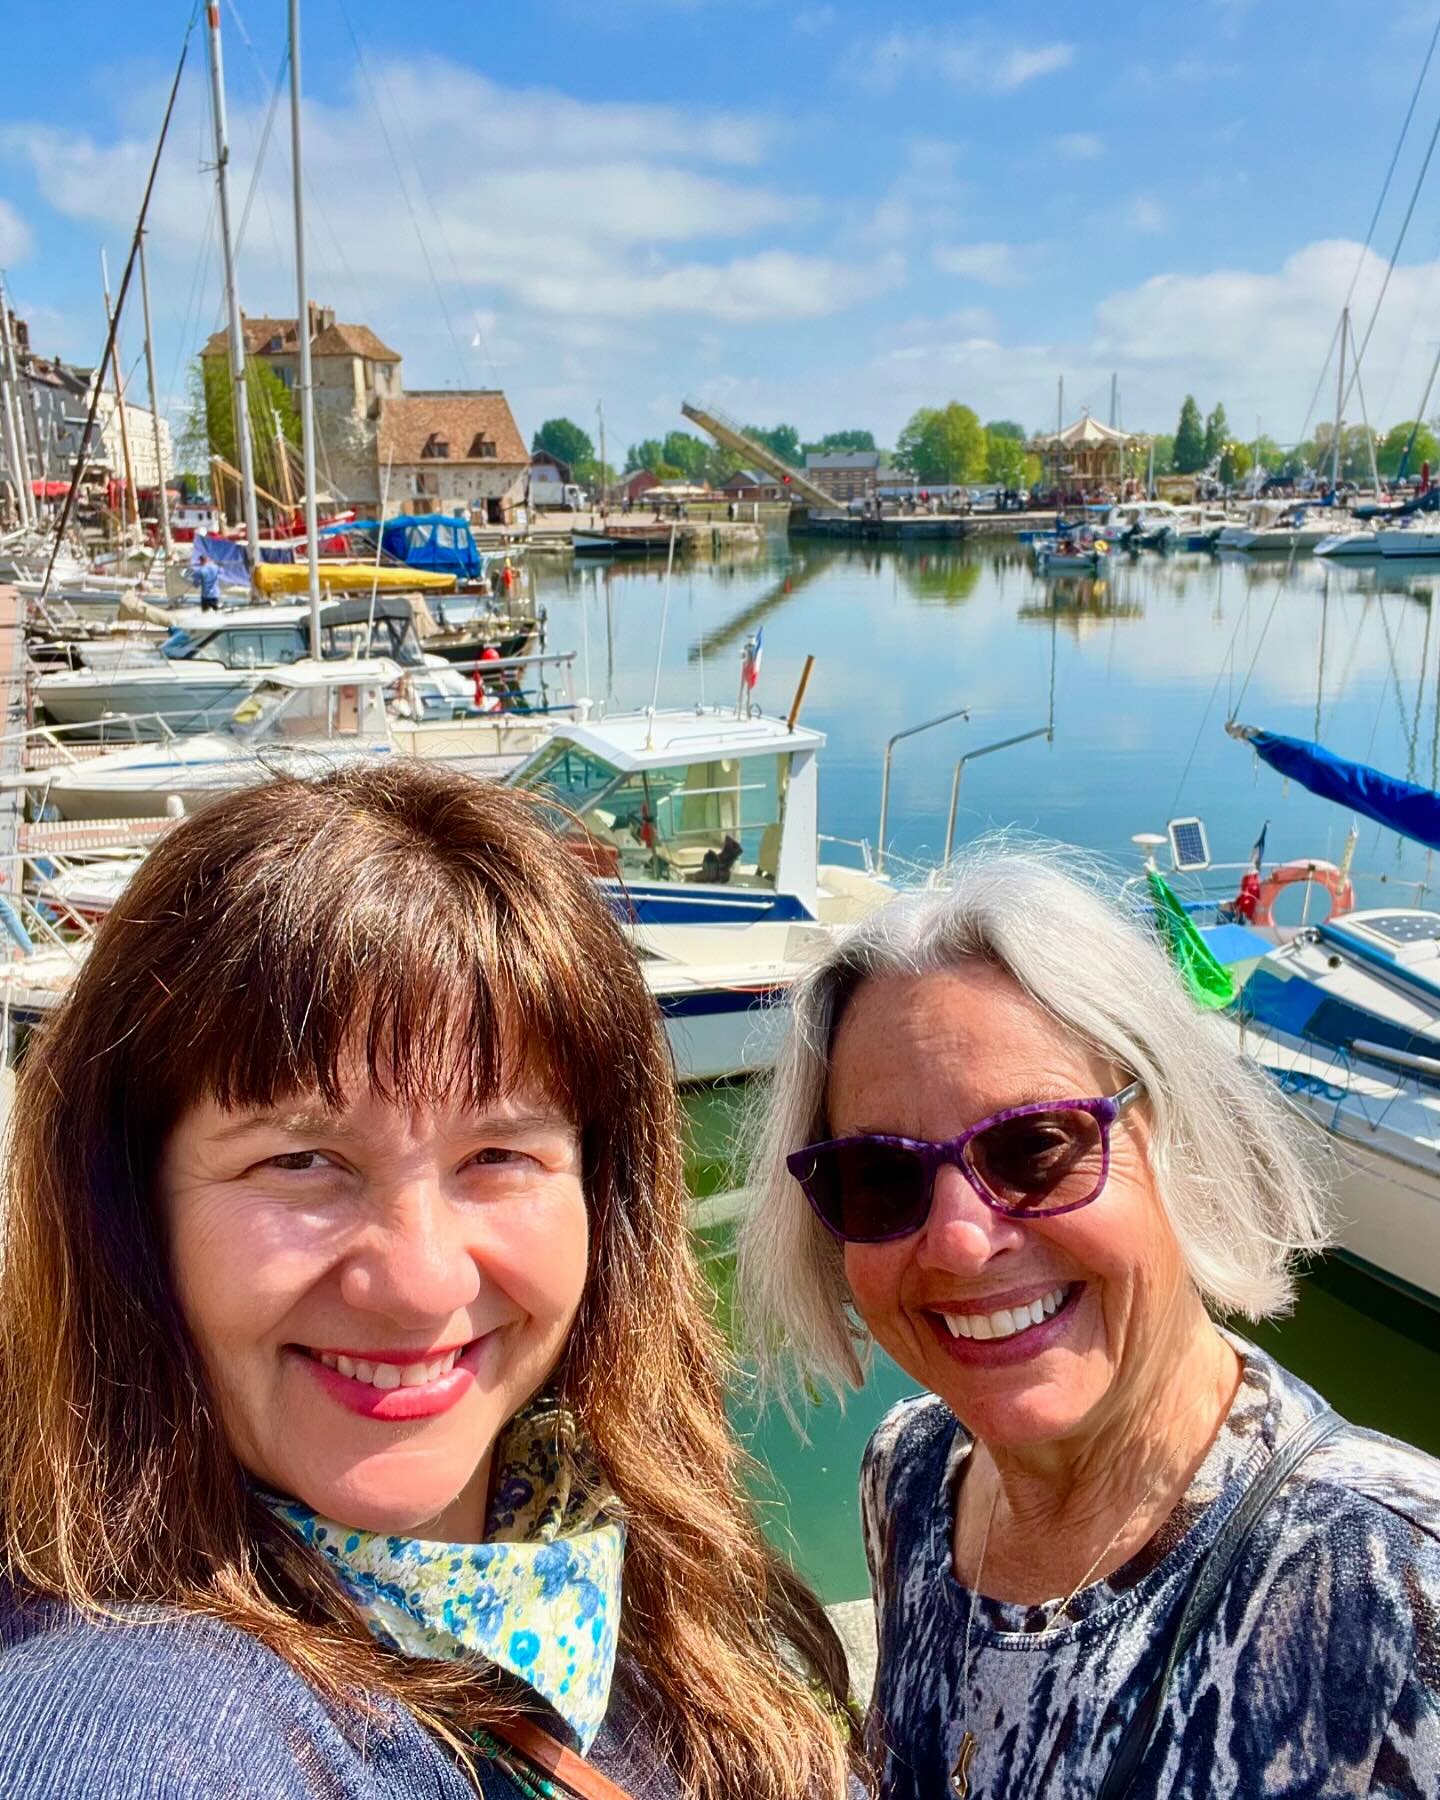 Coming home today after 7 days in France with my mama. She wanted to walk in the steps of the impressionist painters on the 150th anniversary of the artistic movement. Her travel partner couldn&rsquo;t make it at the last minute so I hopped aboard! 
